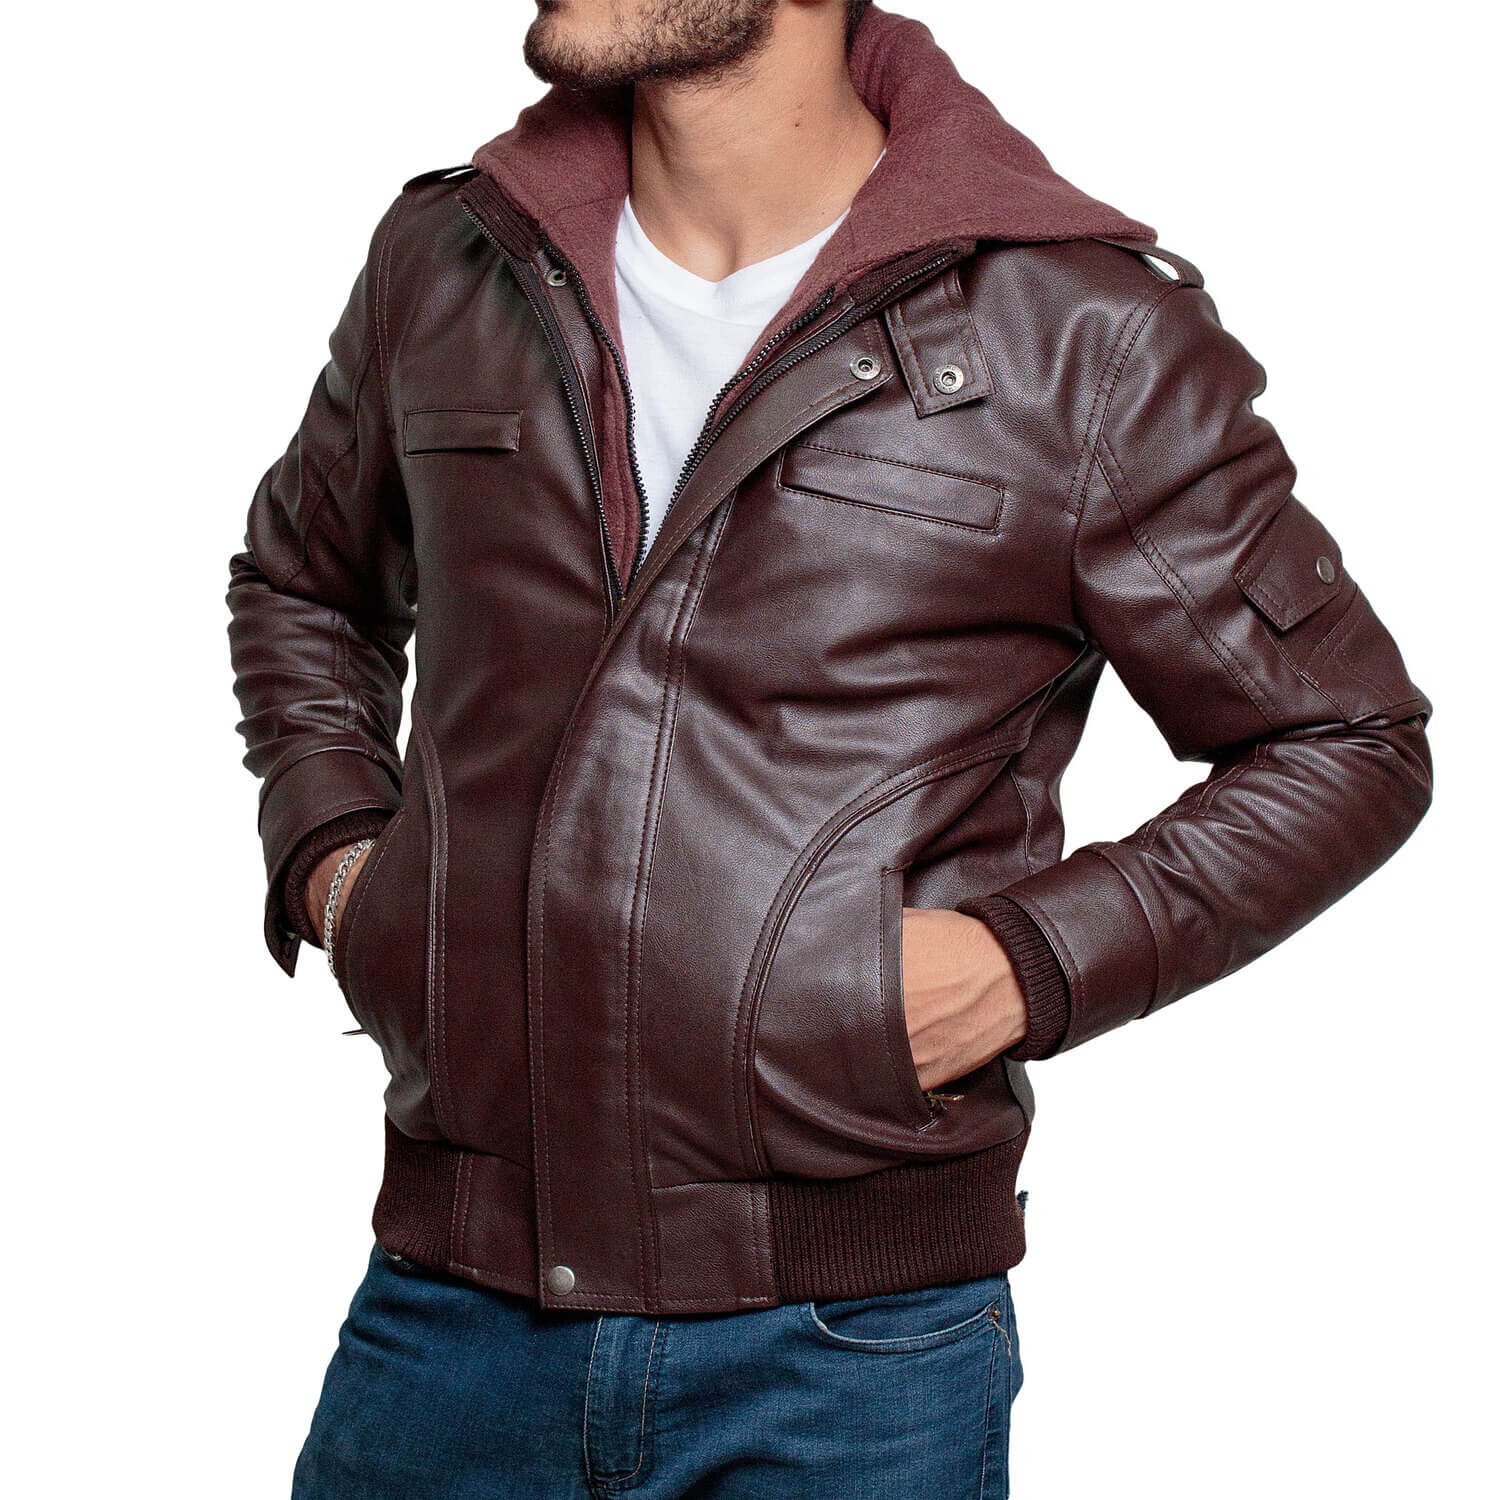 XJ Mens Brown Leather Jacket with Hood | XtremeJackets